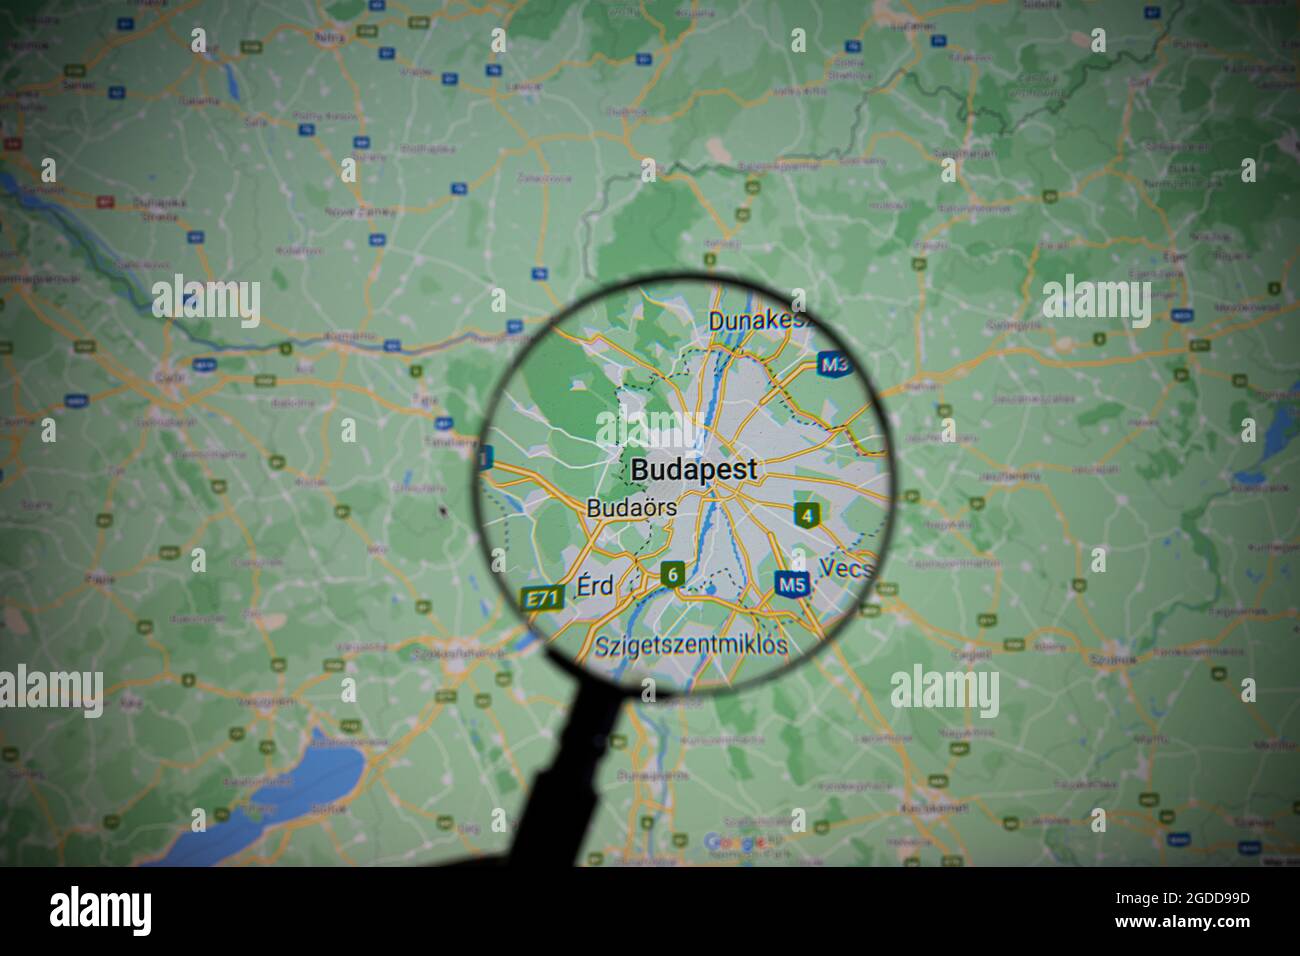 view of the city of Budapest, capital of Hungary, through a magnifying glass on Google Maps Stock Photo